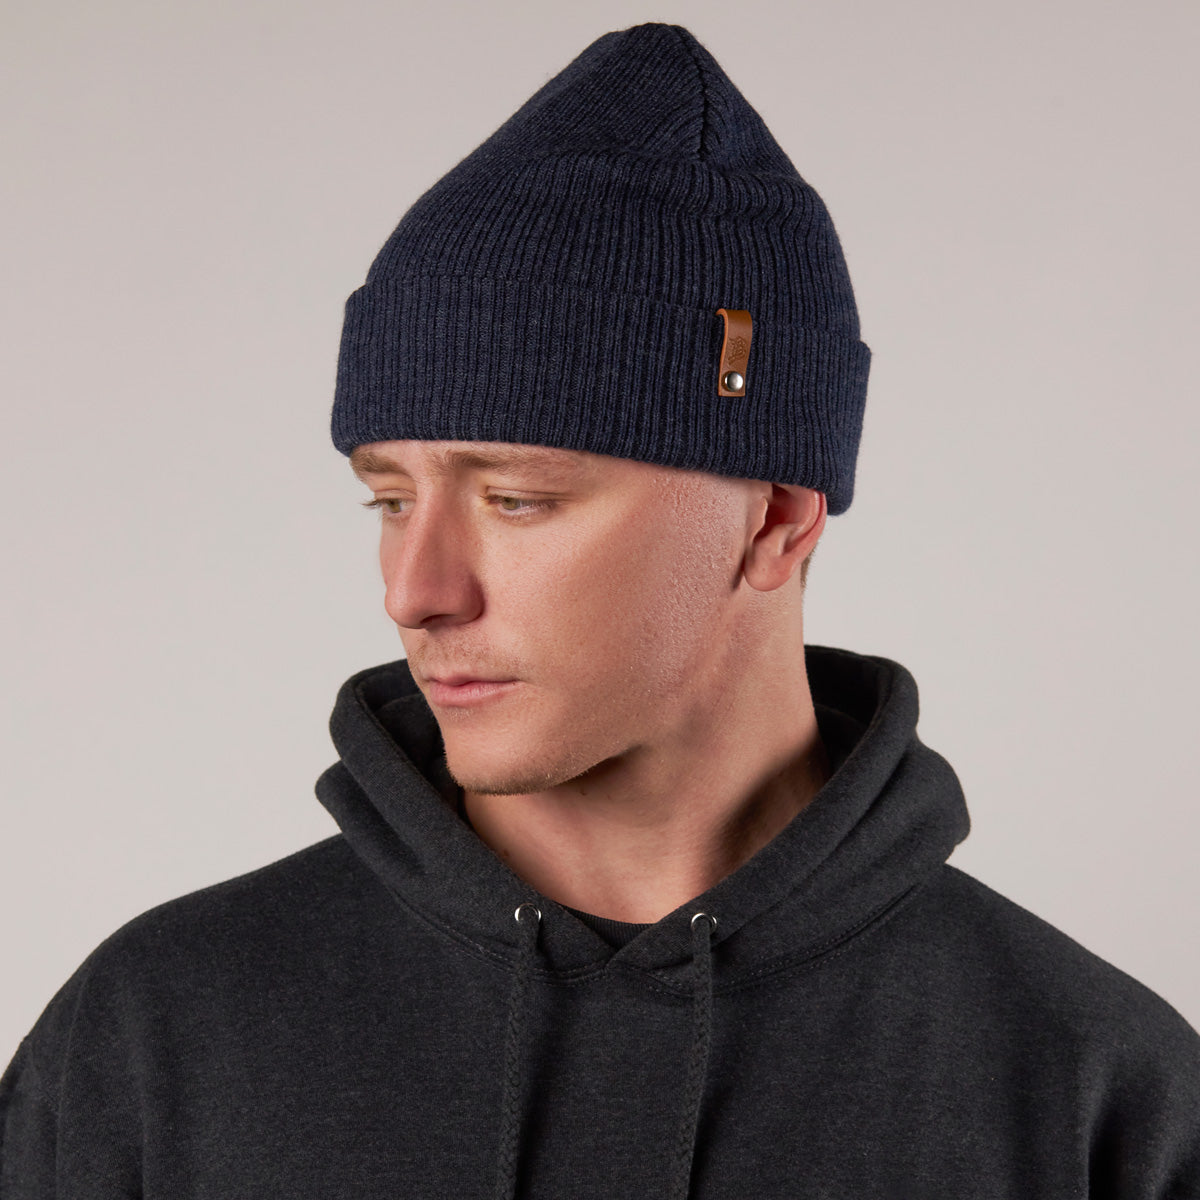 Bare Essential Beanie 2-Pack Charcoal + Navy, Gray + Navy